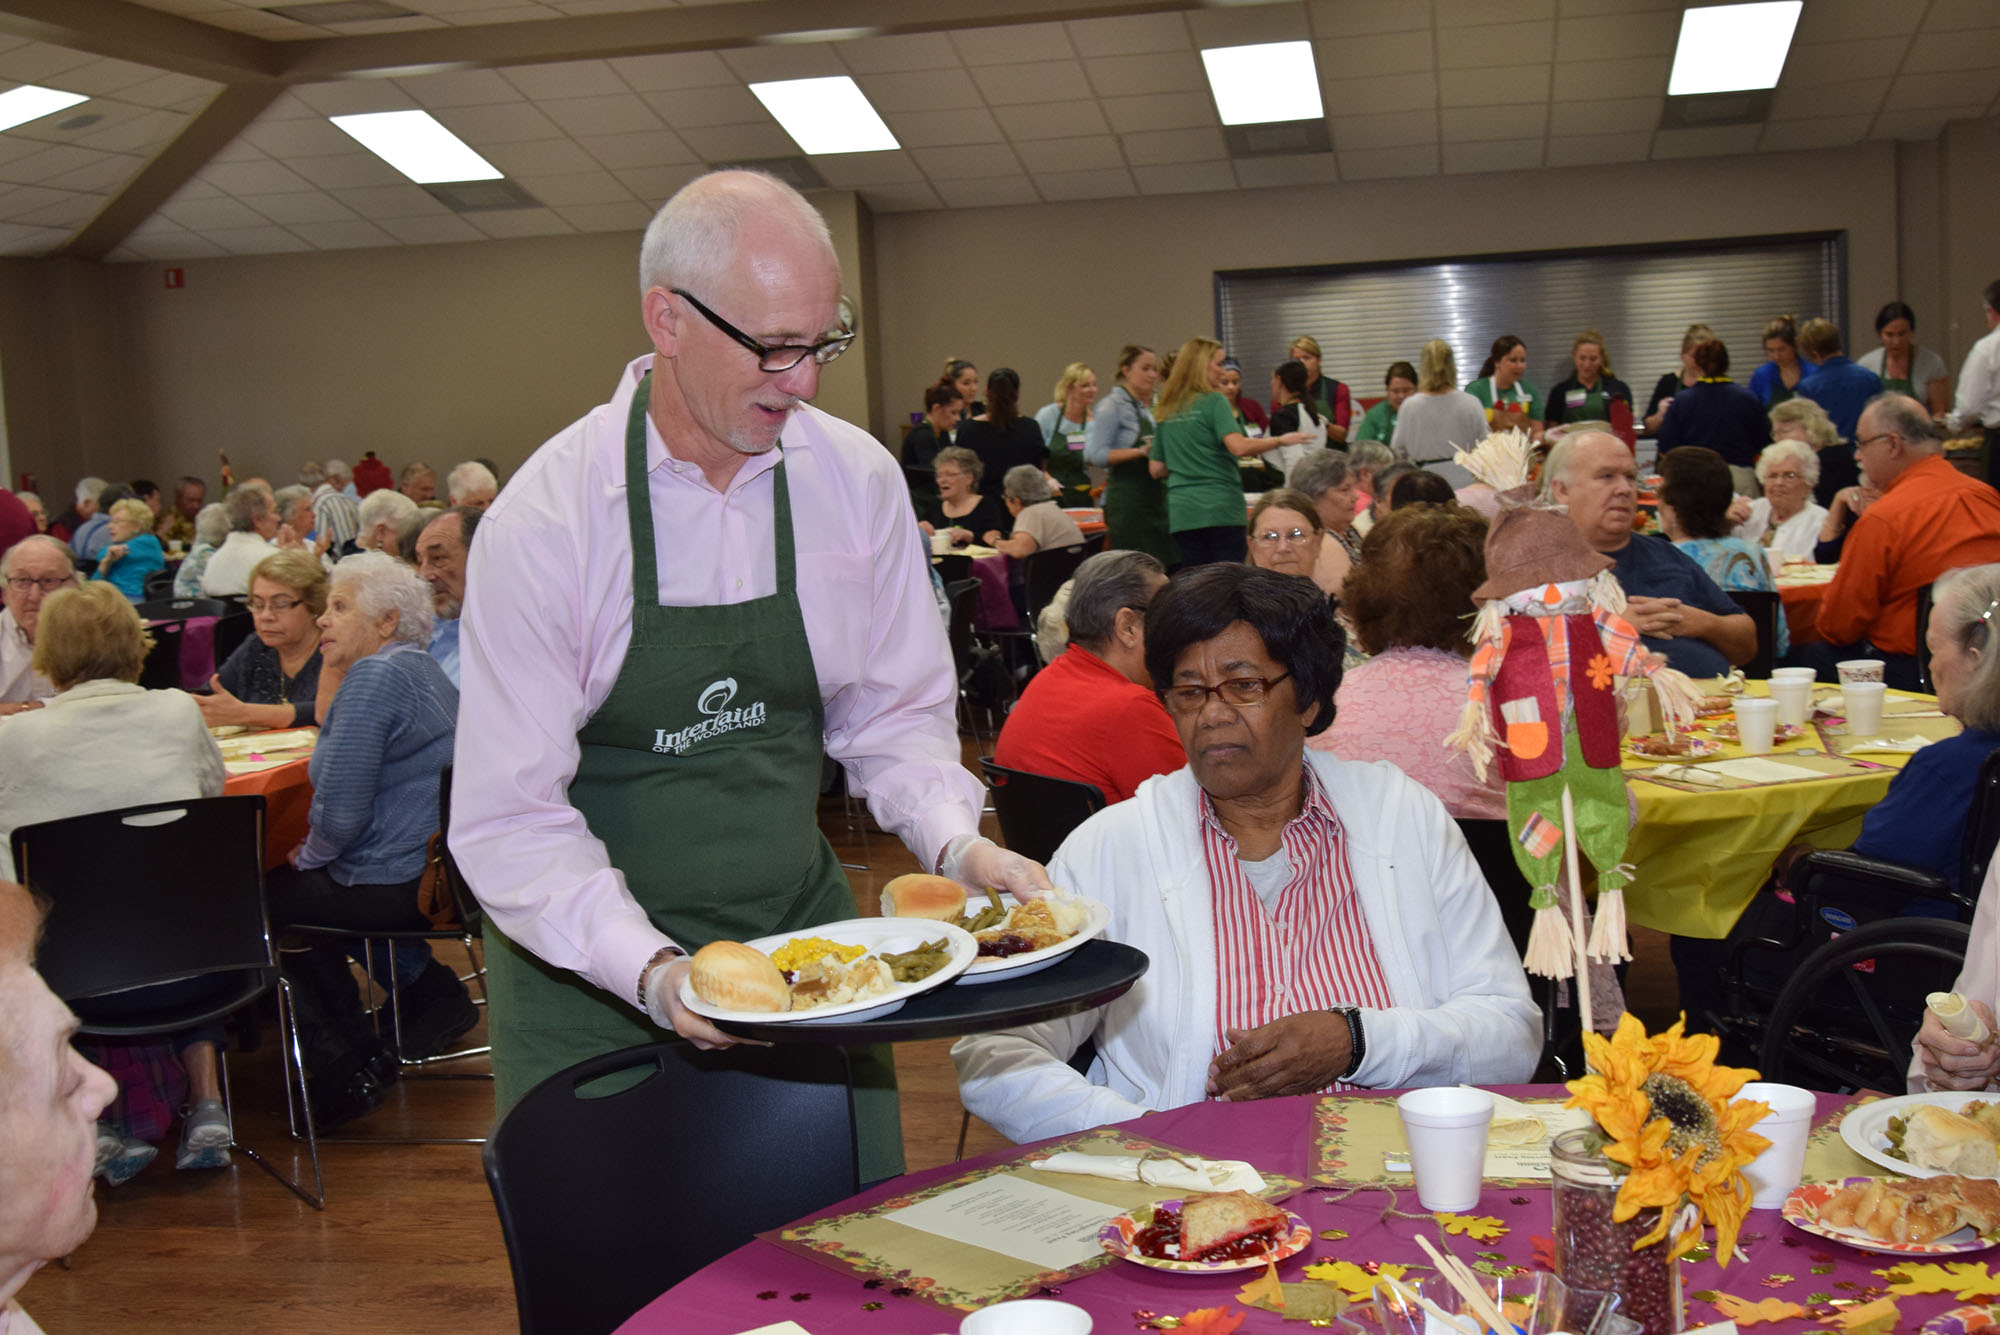 Rob Johnson serving Thanksgiving Meal